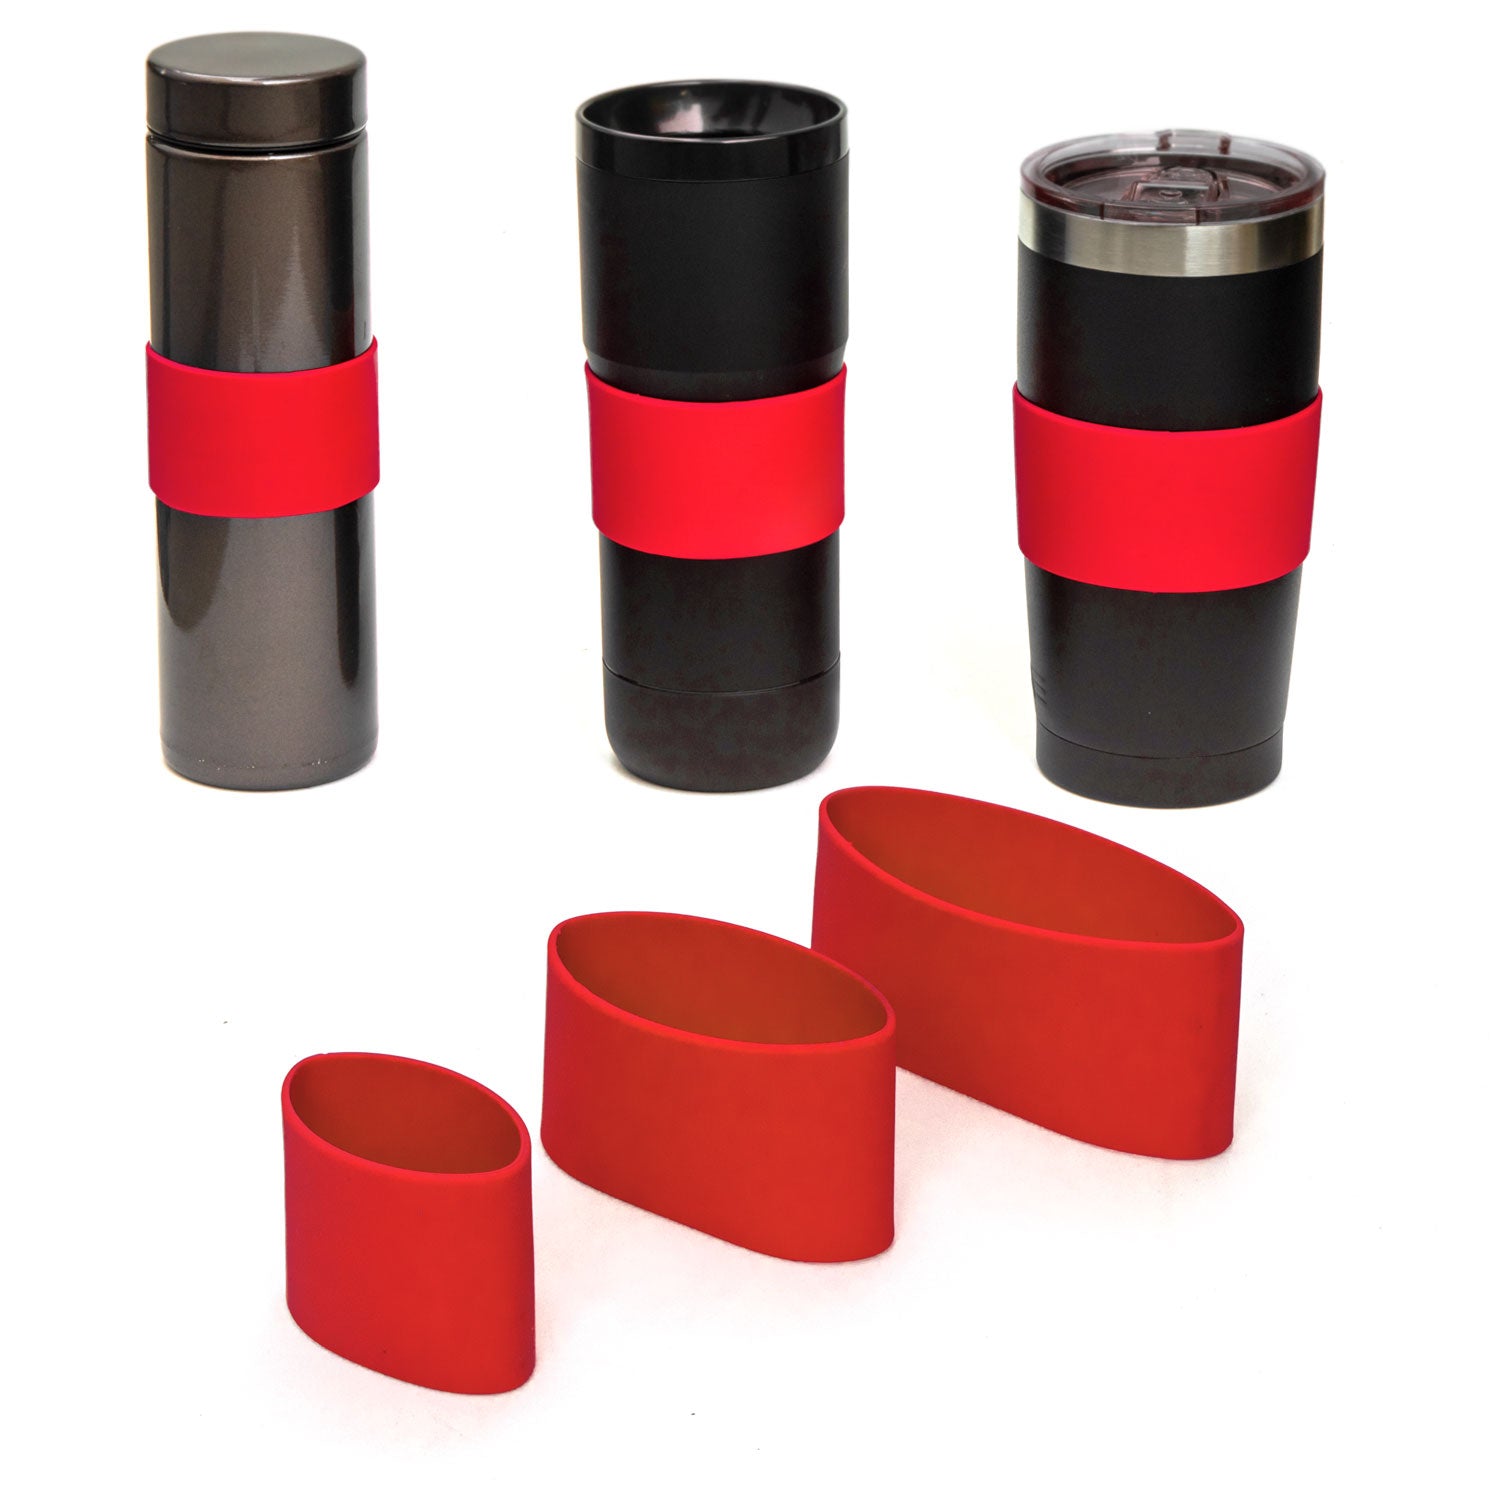 Grifiti Band Joes Silicone Grip Bands 3 Pack Assorted Sizes Mugs Cups Bottles Knobs Dumbbells - Grifiti